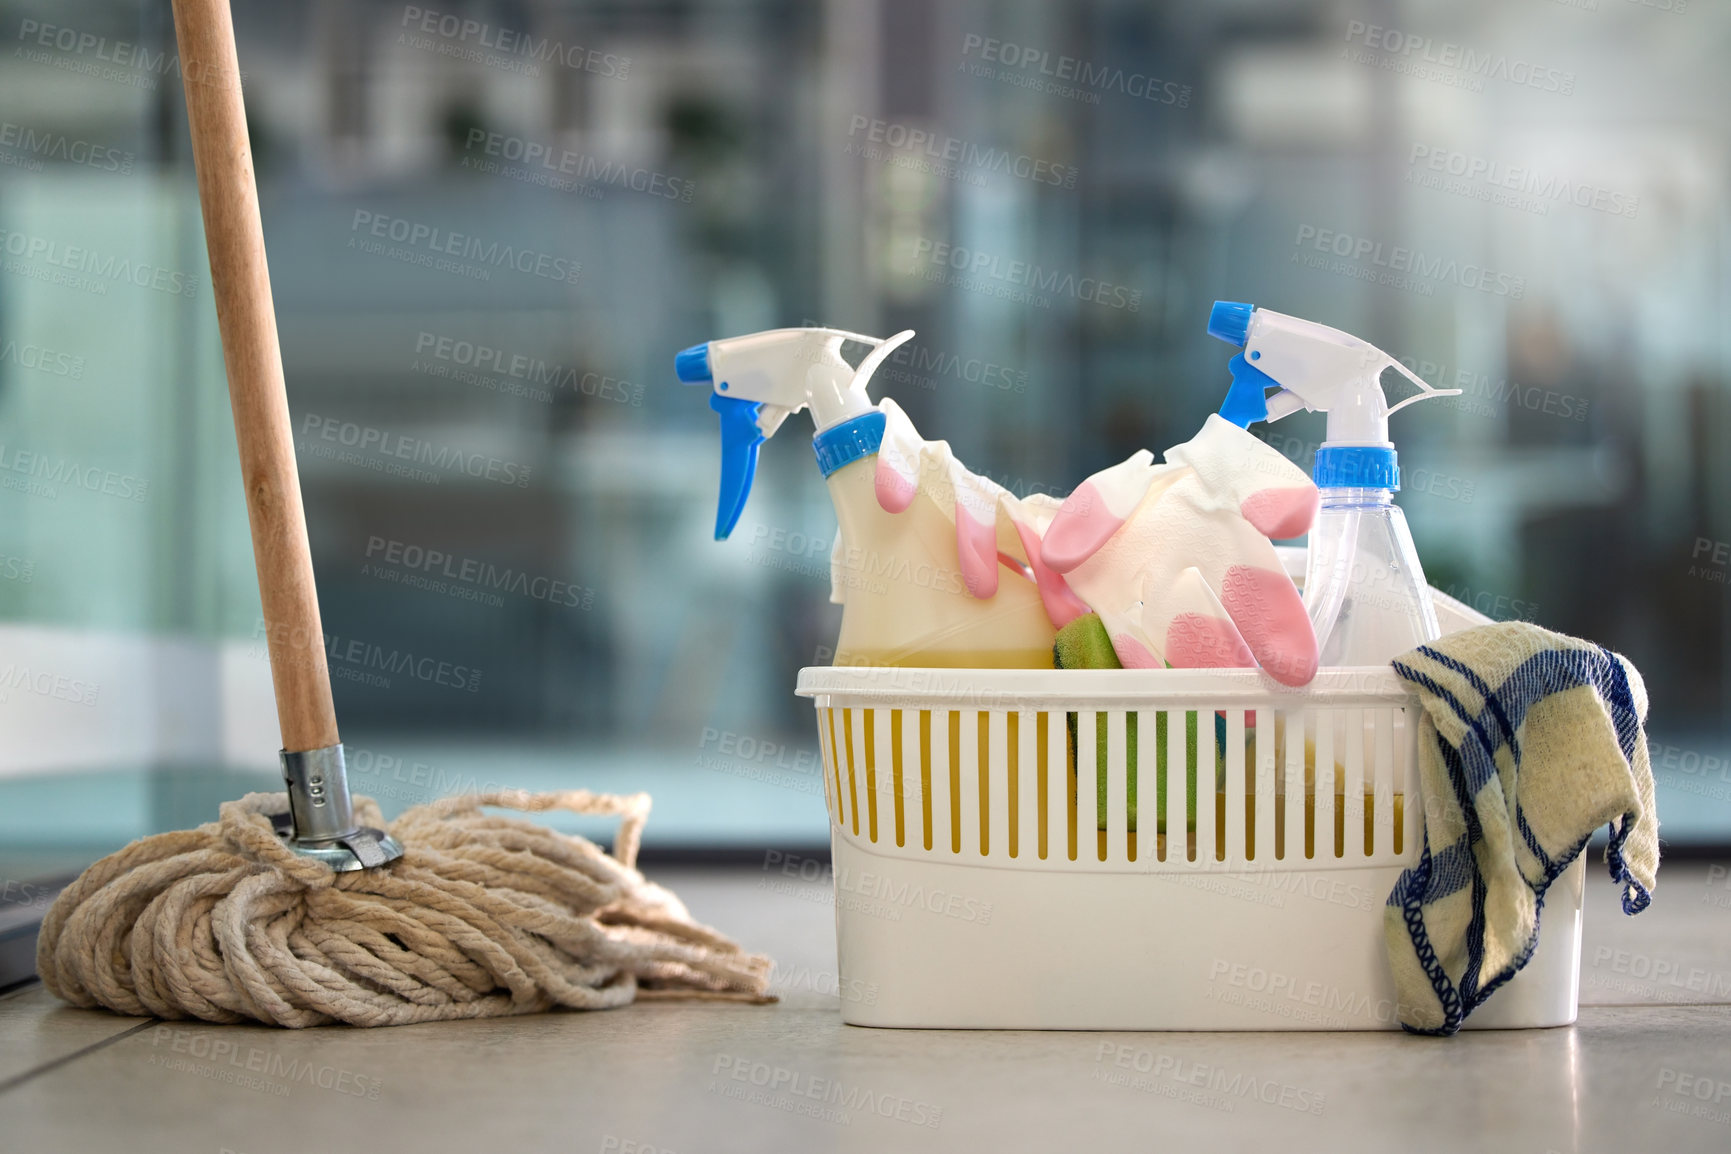 Buy stock photo Shot of cleaning products on the floor at home